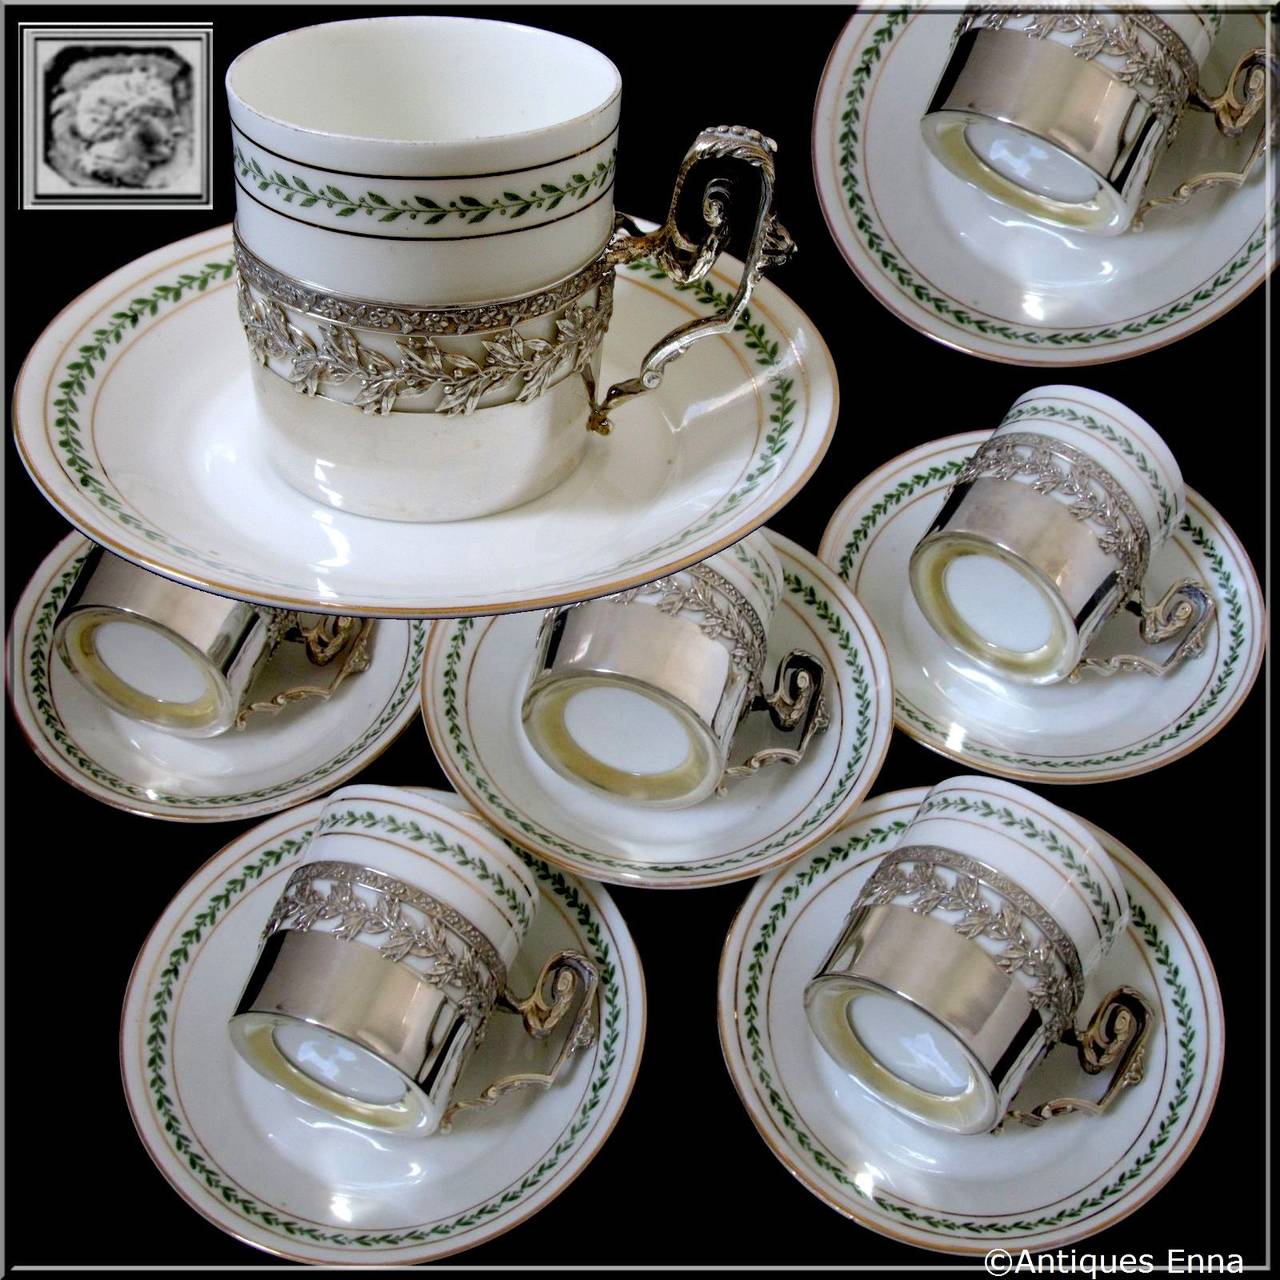 1870's French Sterling Silver Porcelain of Paris Six Coffee Tea Cups with Saucers Empire pattern.

Exceptional and rare service Napoleon III period, including six tea/coffee cups with matching saucers in Paris Porcelain and six demitasse in all